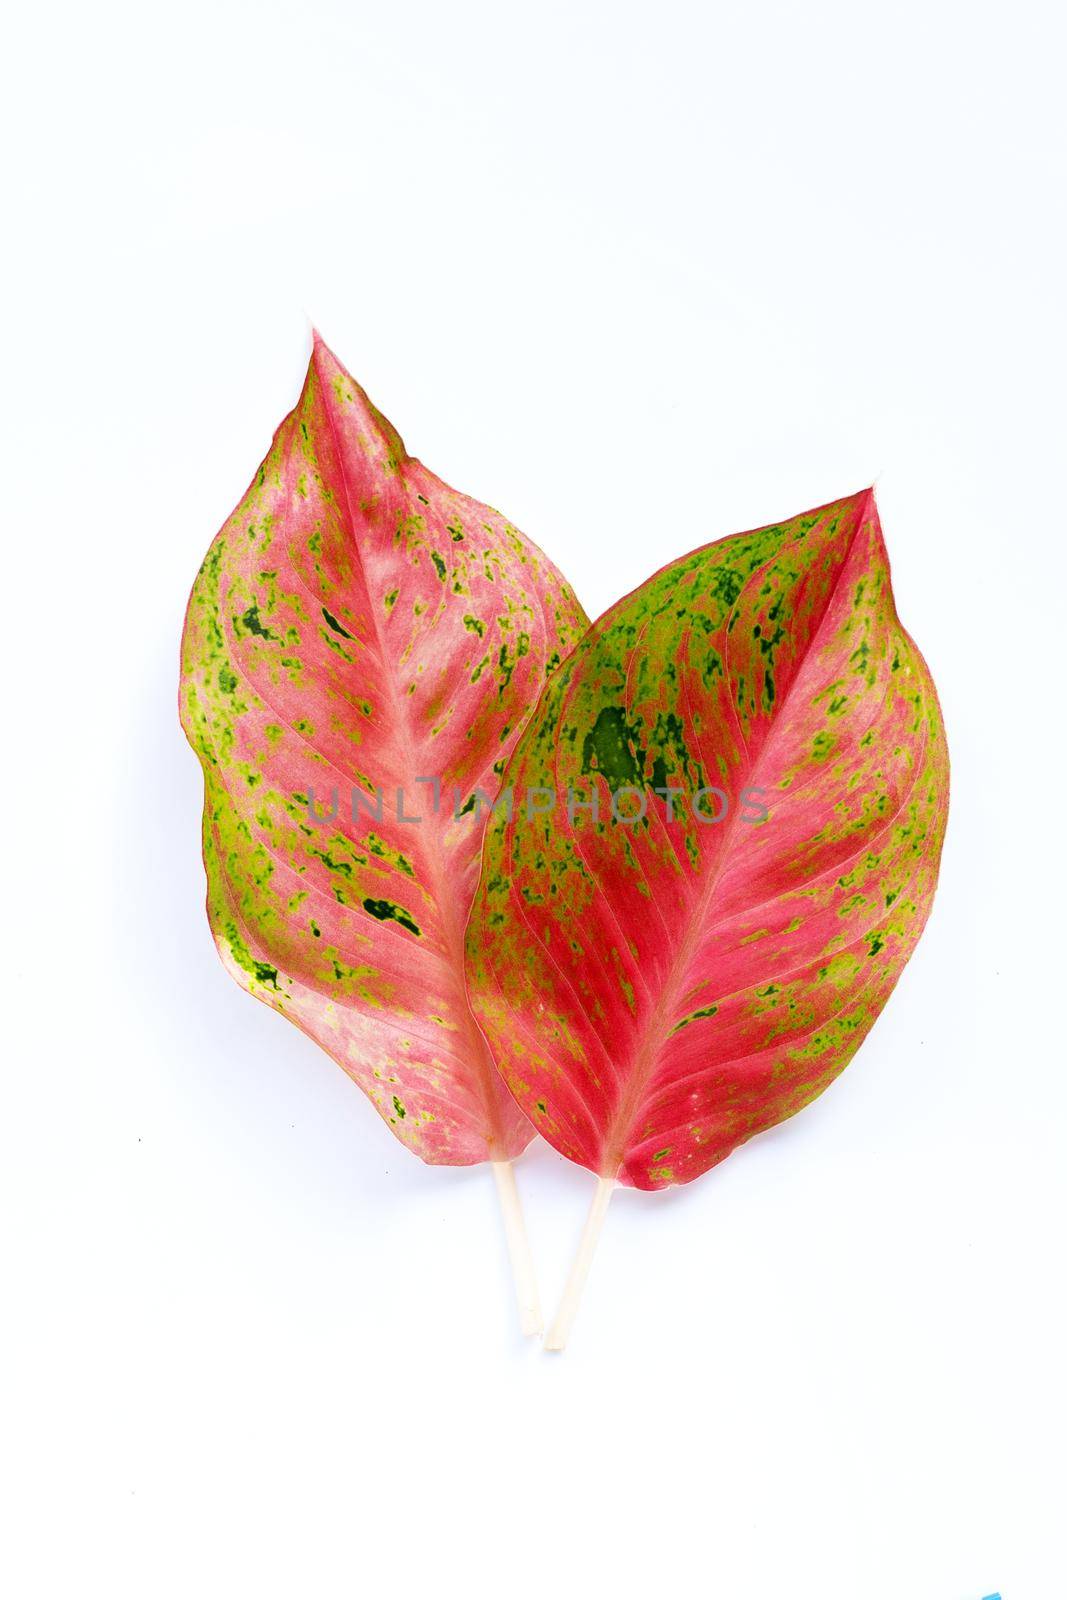 Colorful aglaonema leaves on white background. by Bowonpat